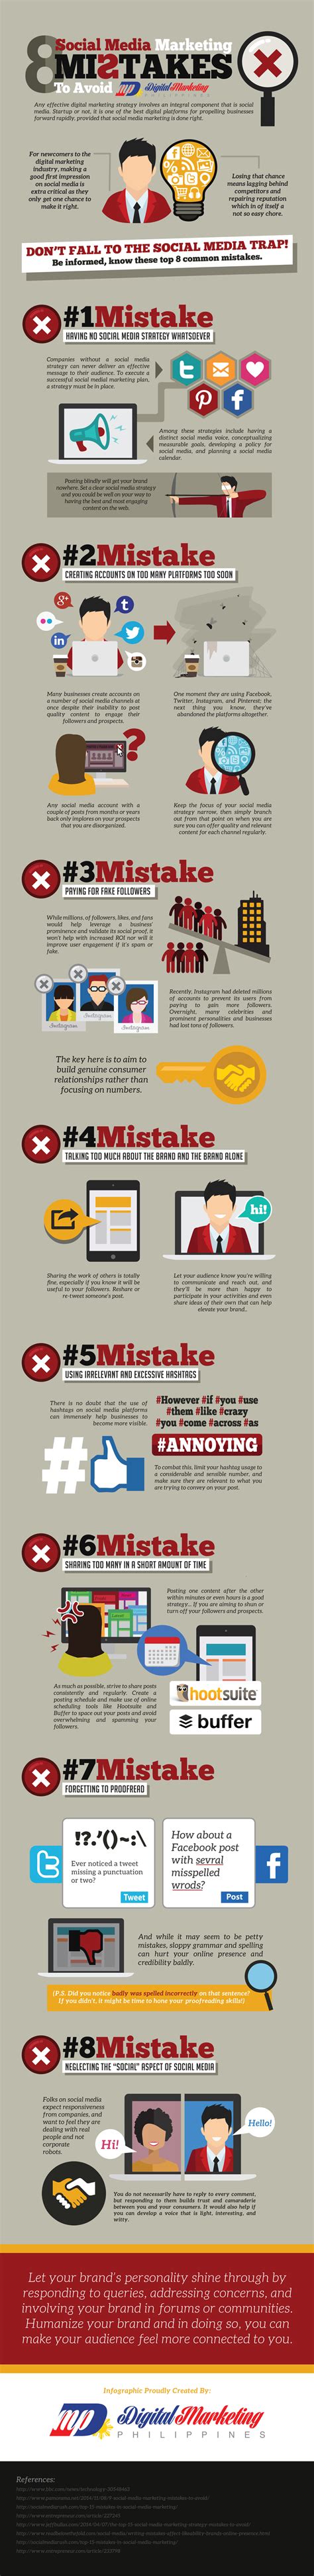 Biggest Social Media Mistakes Made By Businesspeople